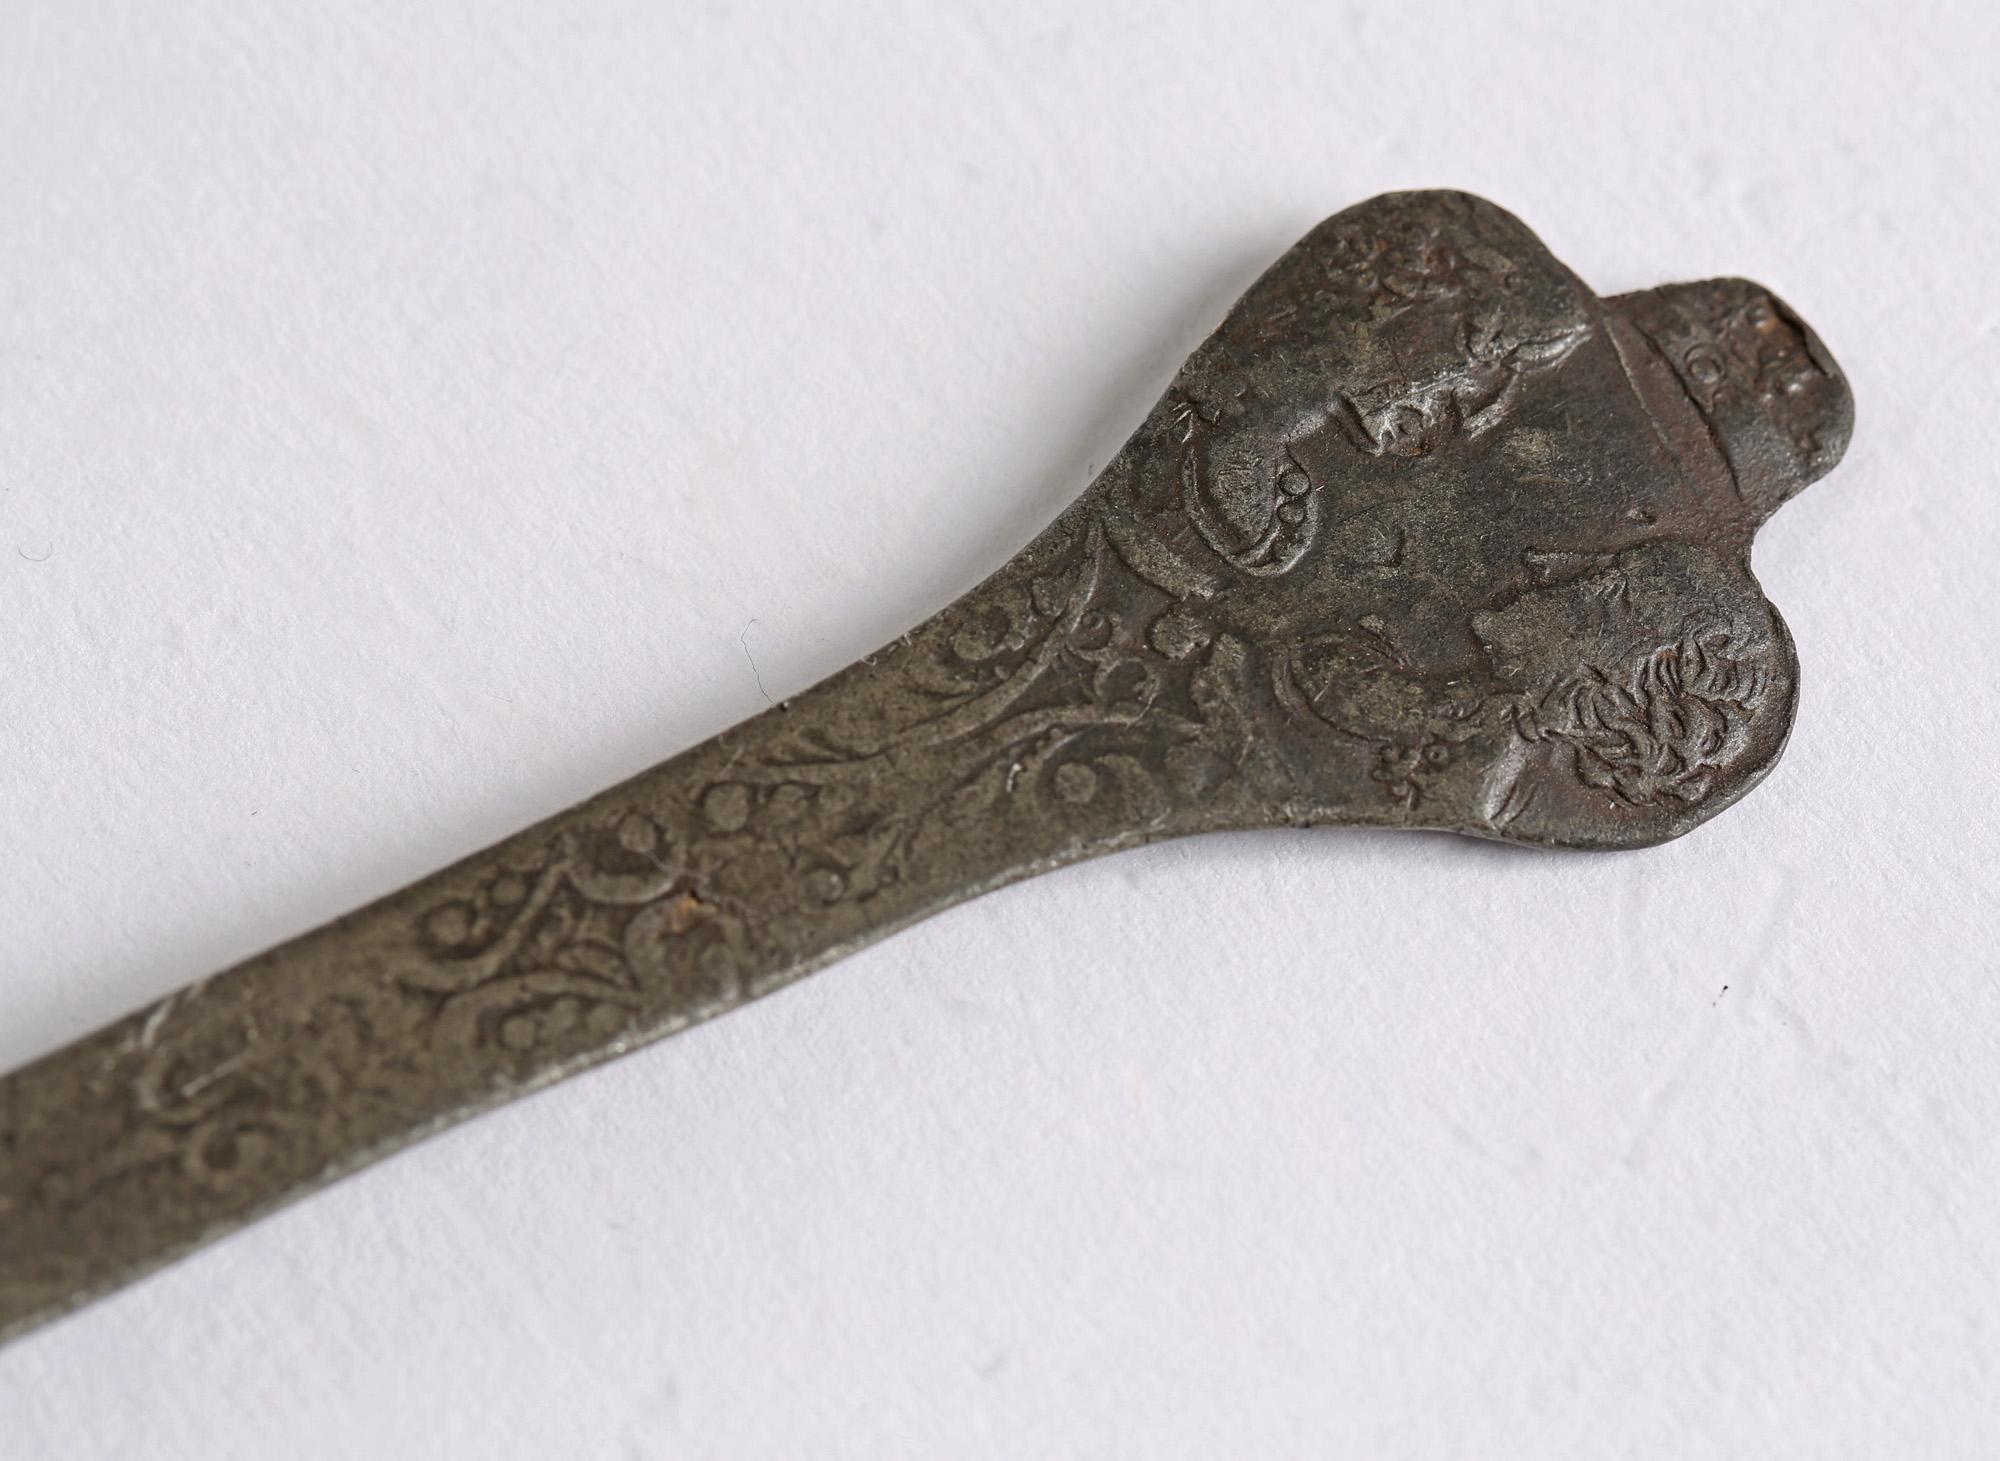 Very rare William and Mary pewter trefid spoon the handle molded in relief with portraits and dating from around 1690. The spoon has an elongated rounded bowl with a molded ribbed connection to the handle to the base and has a long flat handle